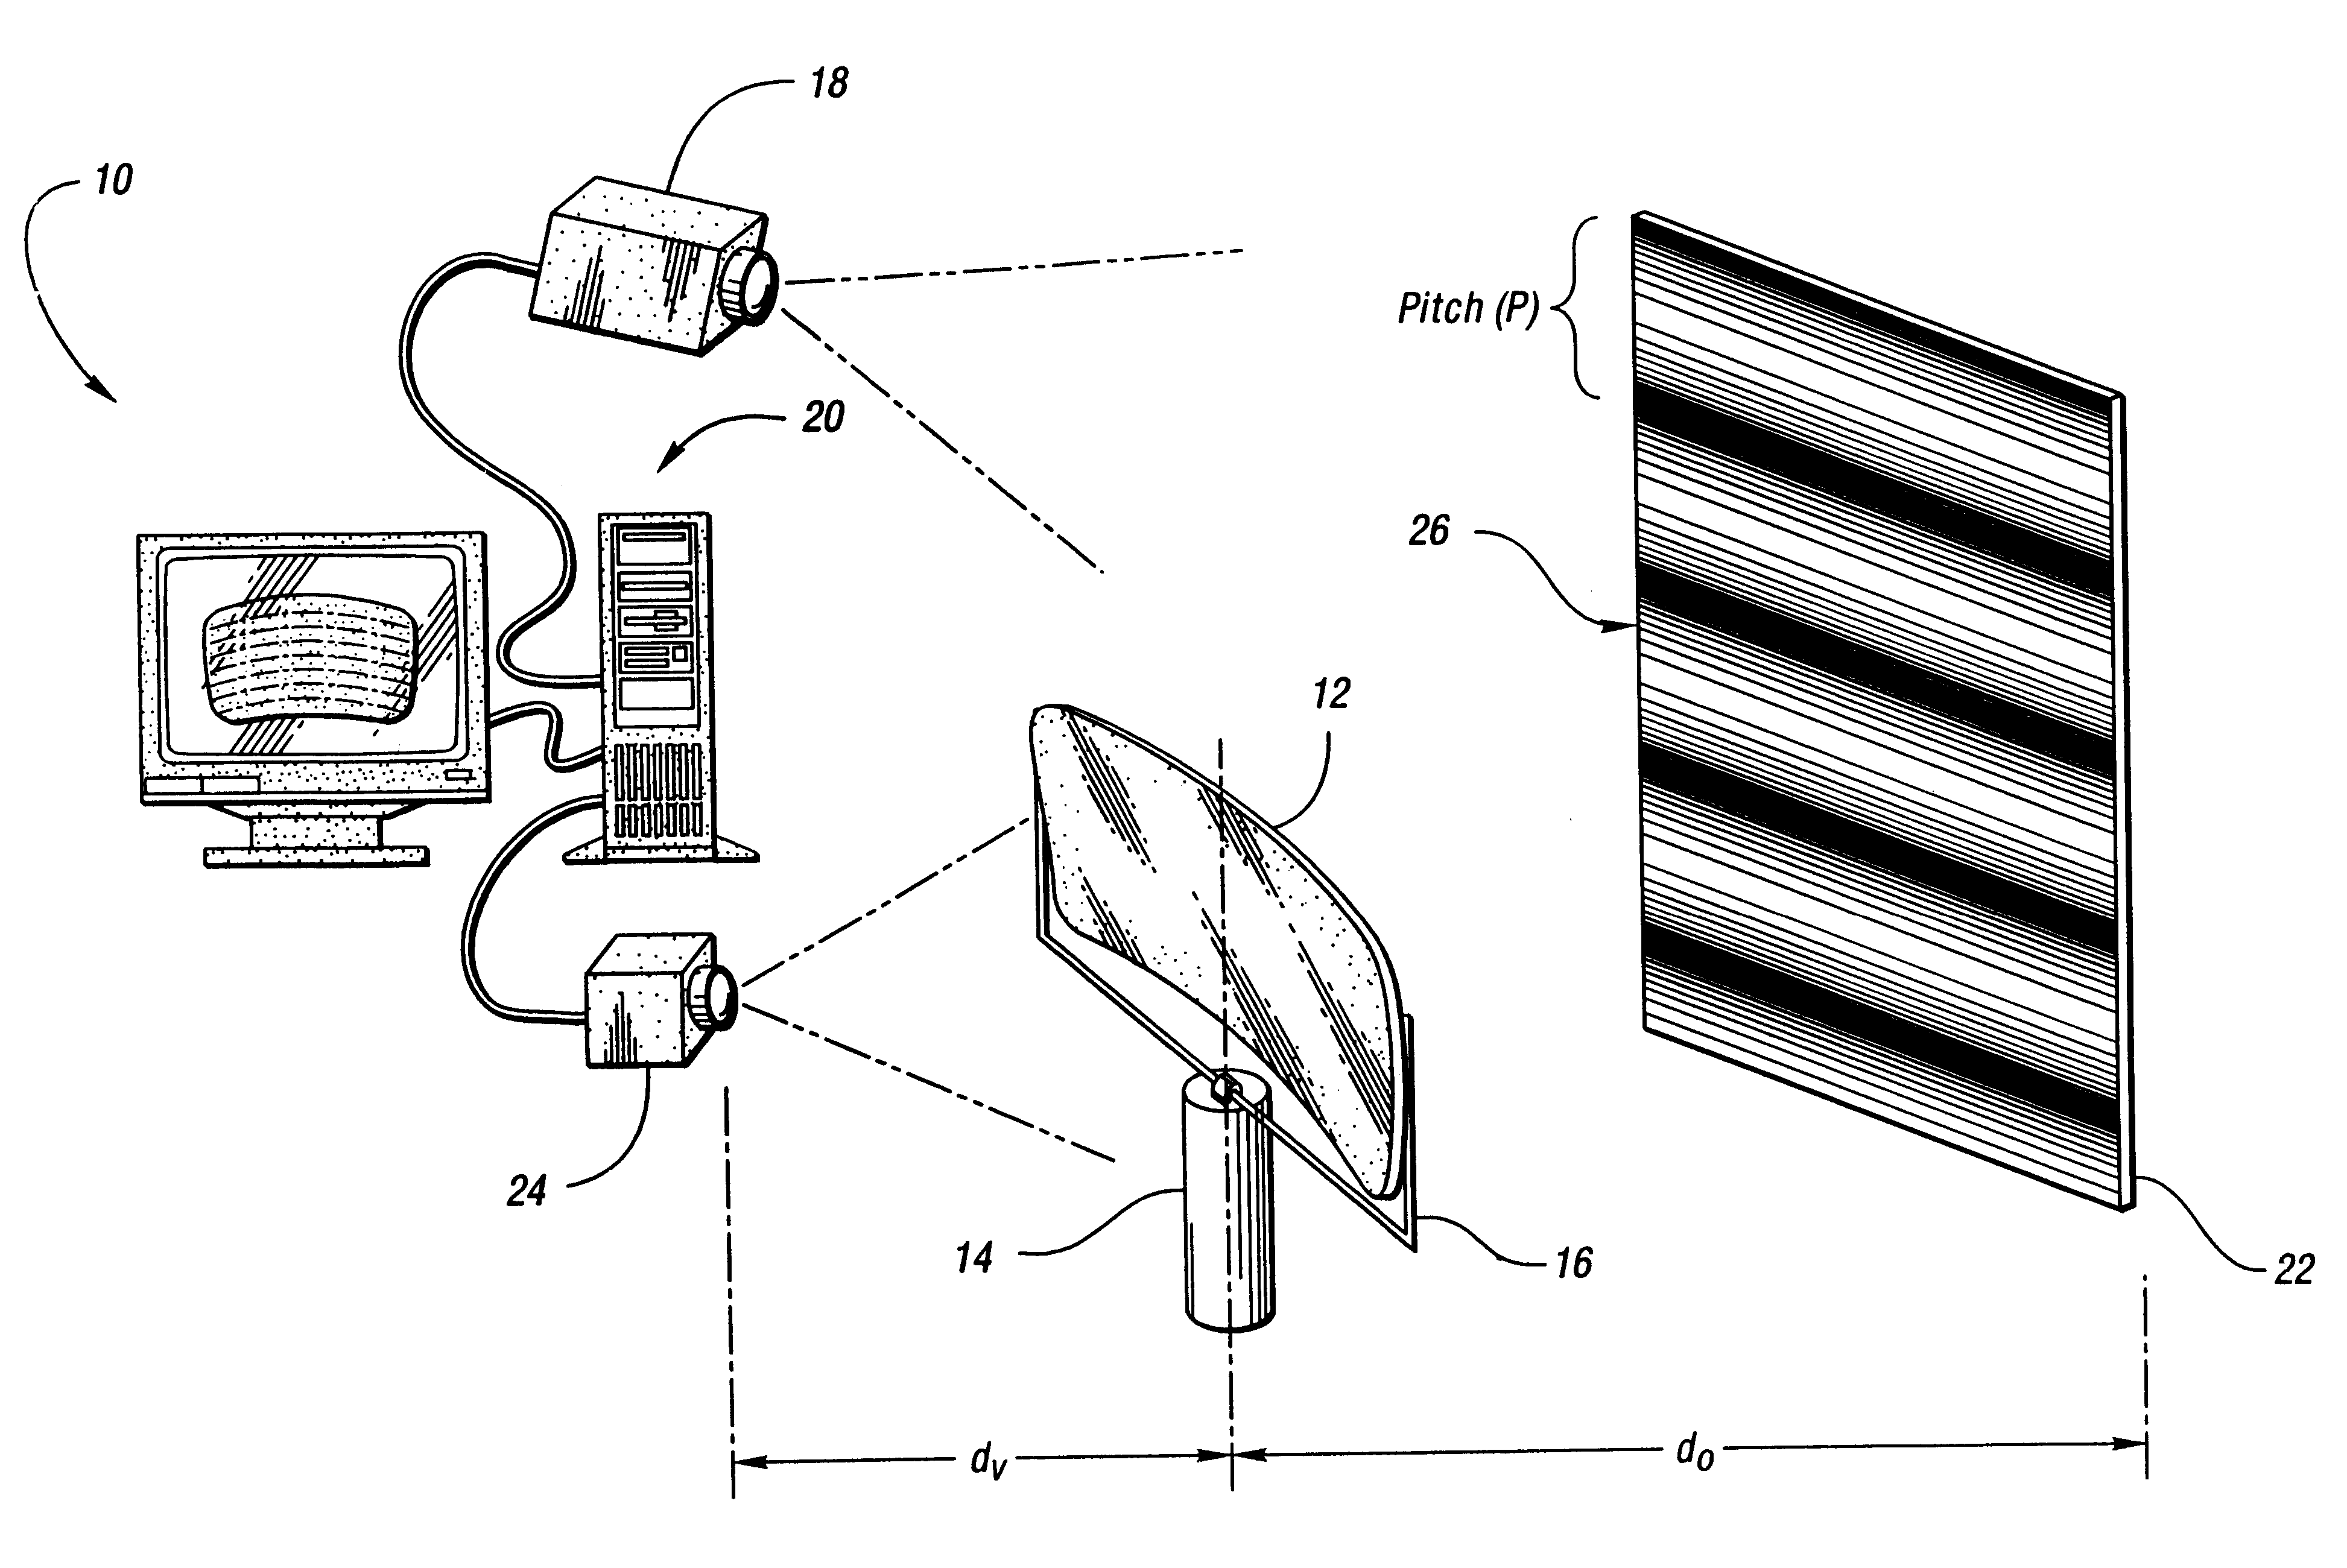 Method and apparatus for determining optical quality